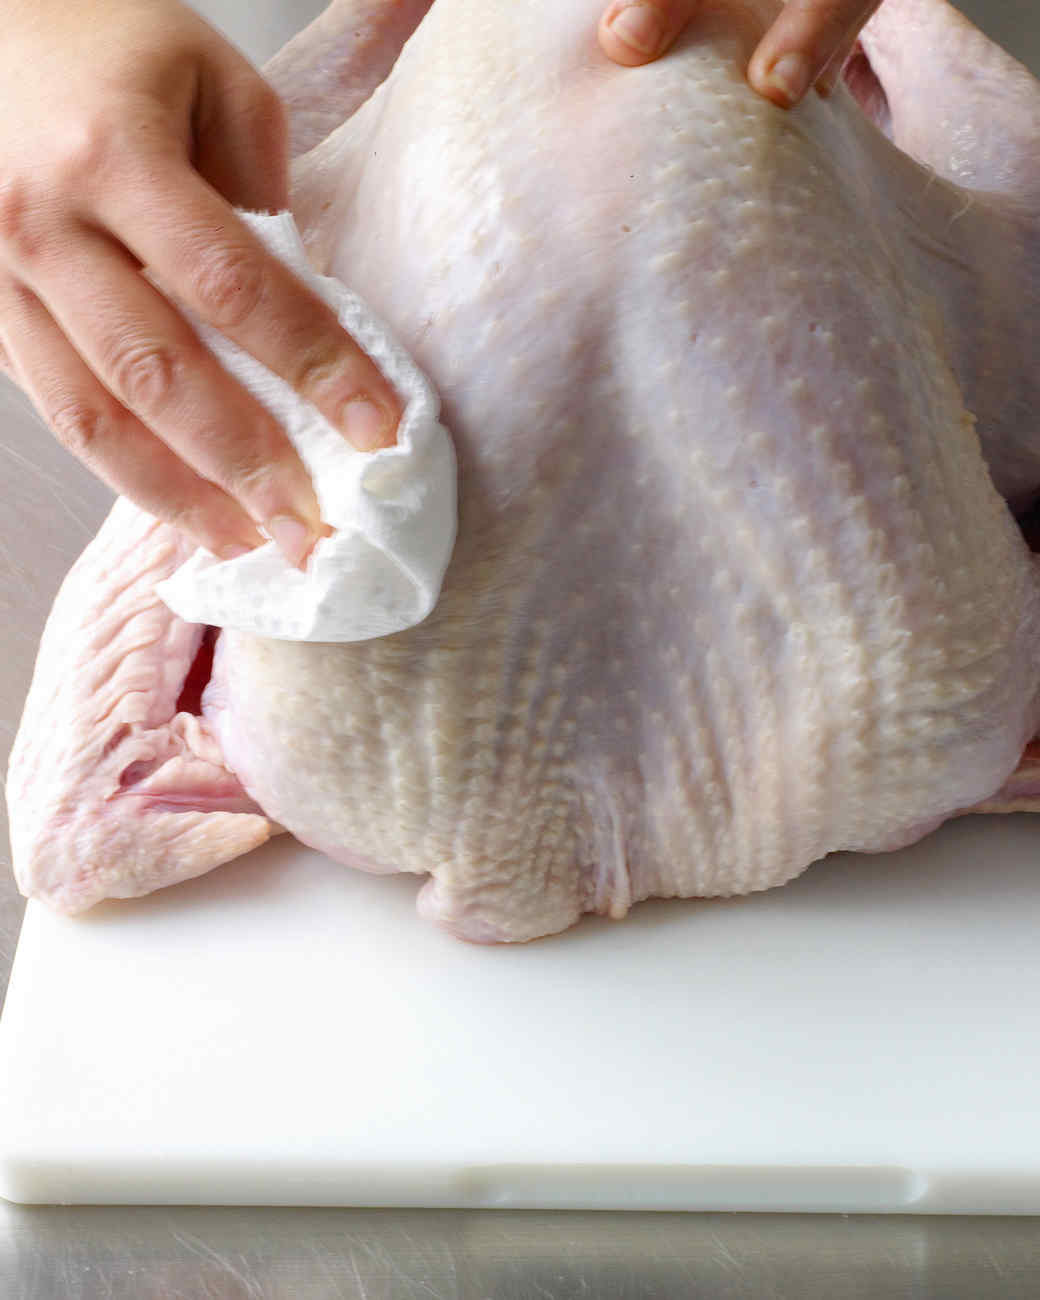 Preparing A Turkey For Thanksgiving
 How to Stuff and Prepare Your Thanksgiving Turkey